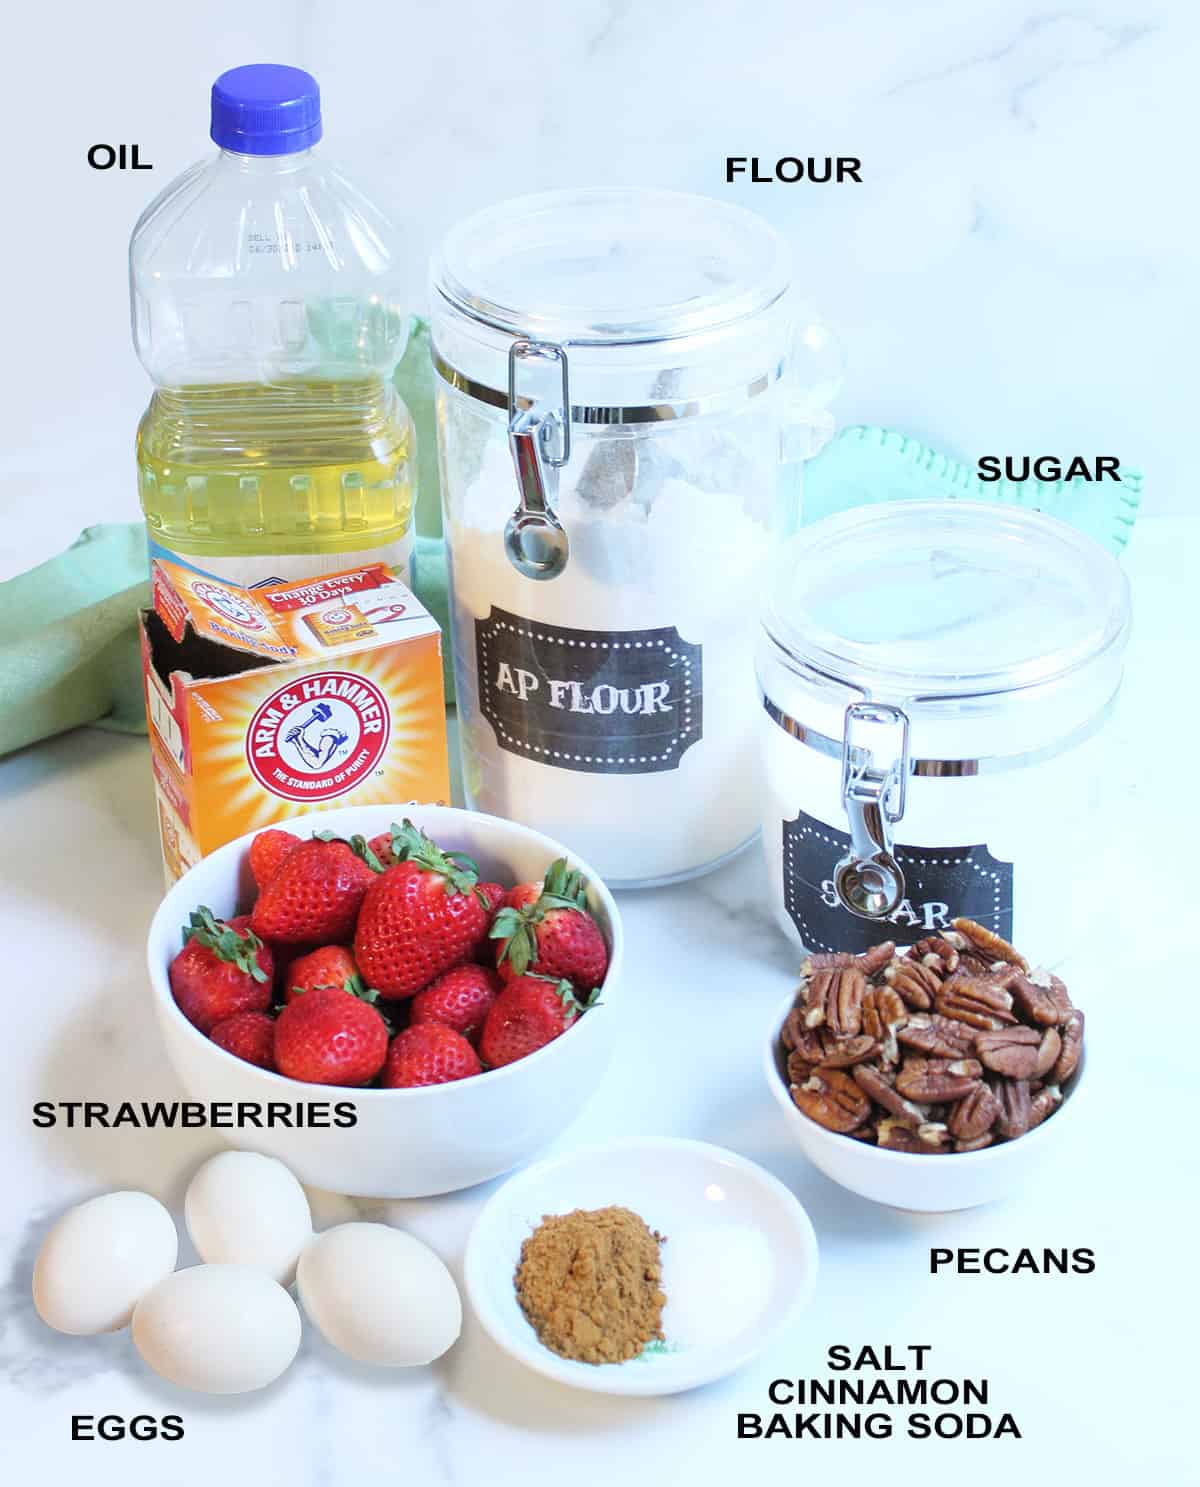 Ingredients for Strawberry Nut Bread.